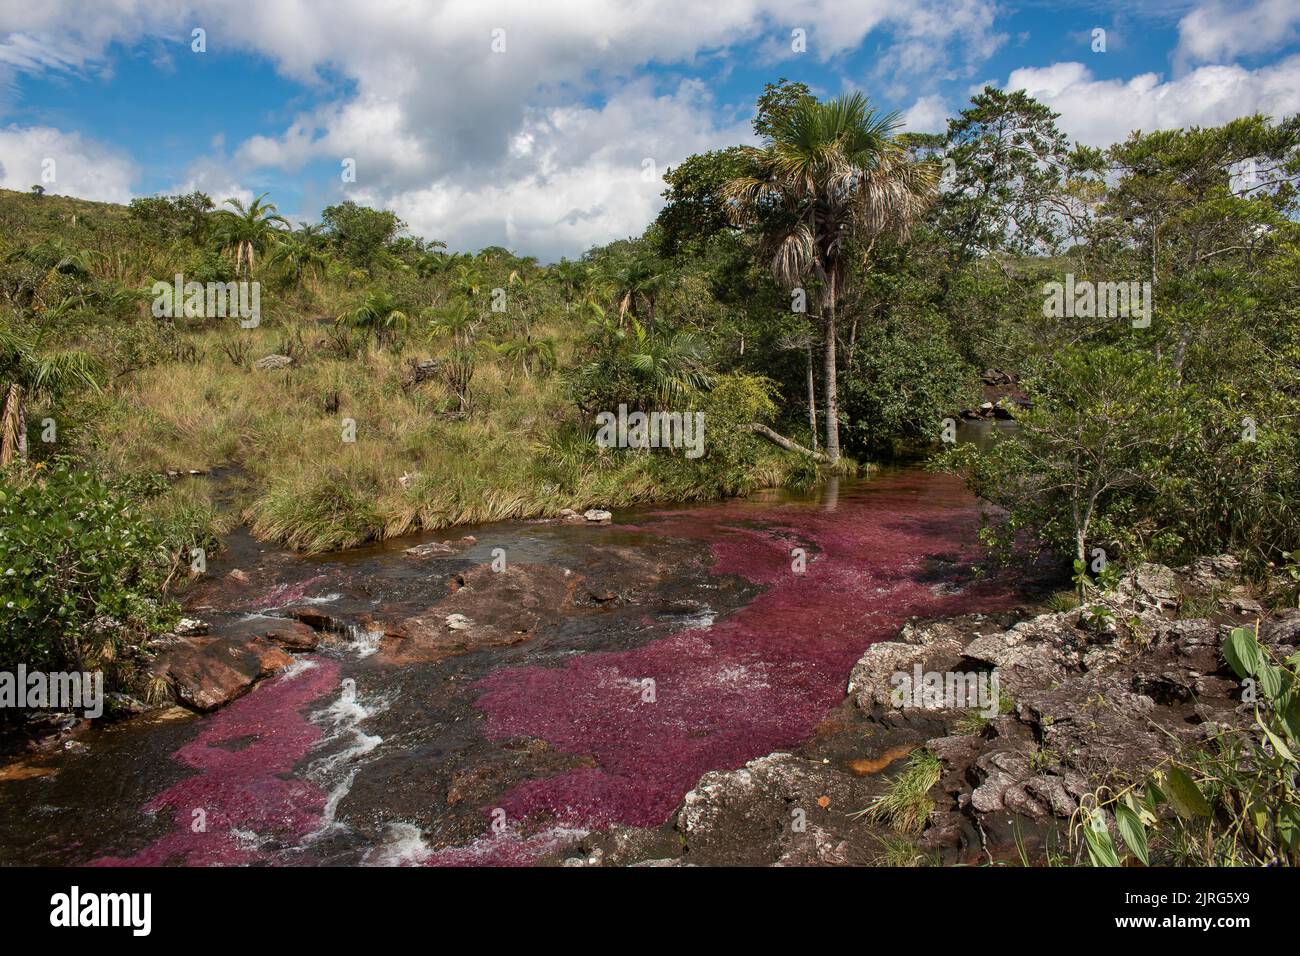 The Cano Cristales river, known as the Rainbow River, in the Serrania de La Macarena National Park in the Meta Department of Colombia Stock Photo